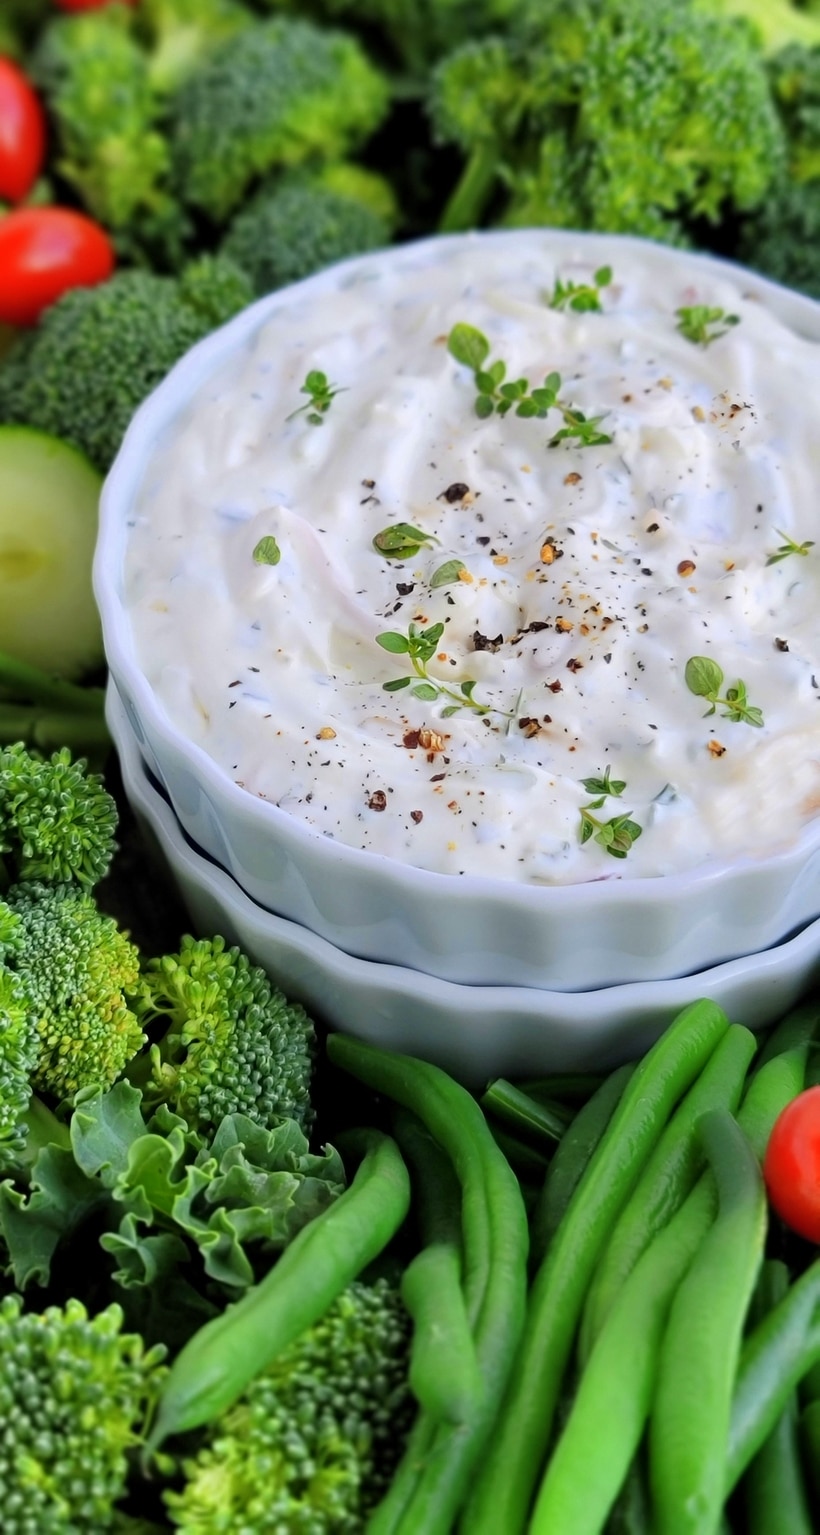 Onion dip with vegetables